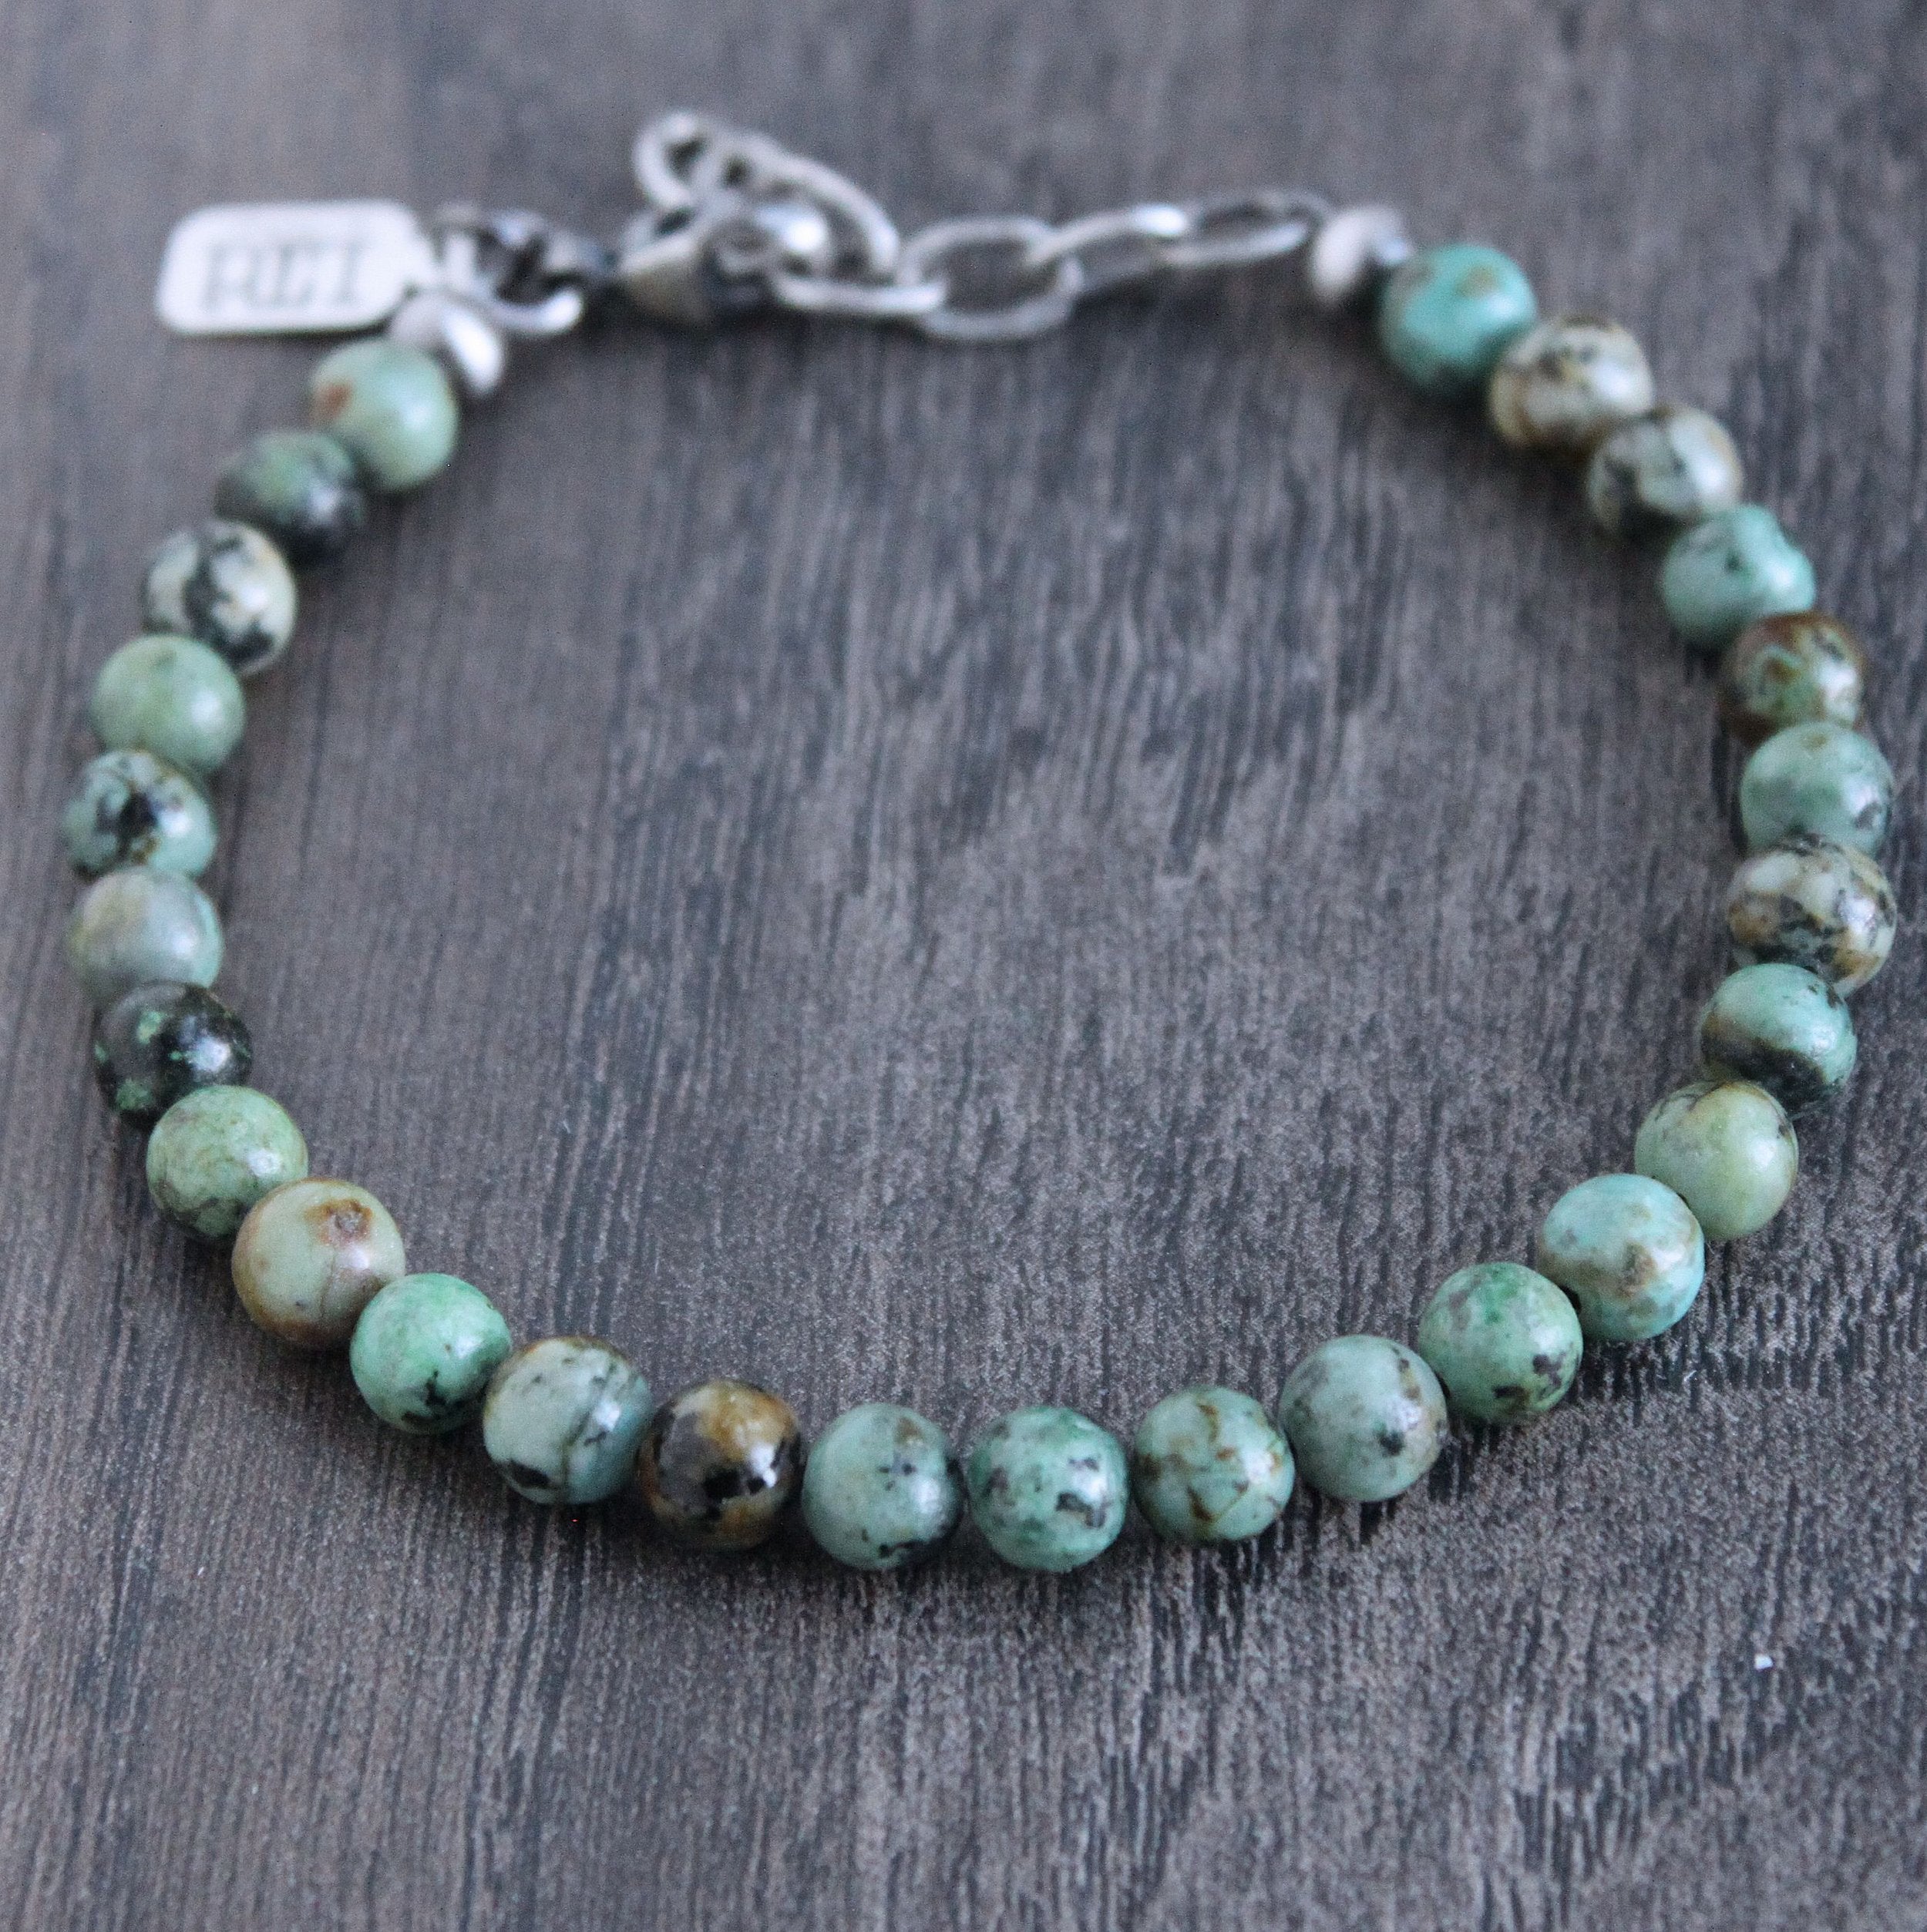 African Turquoise Bead Bracelet with Small Silver Tube - 10mm